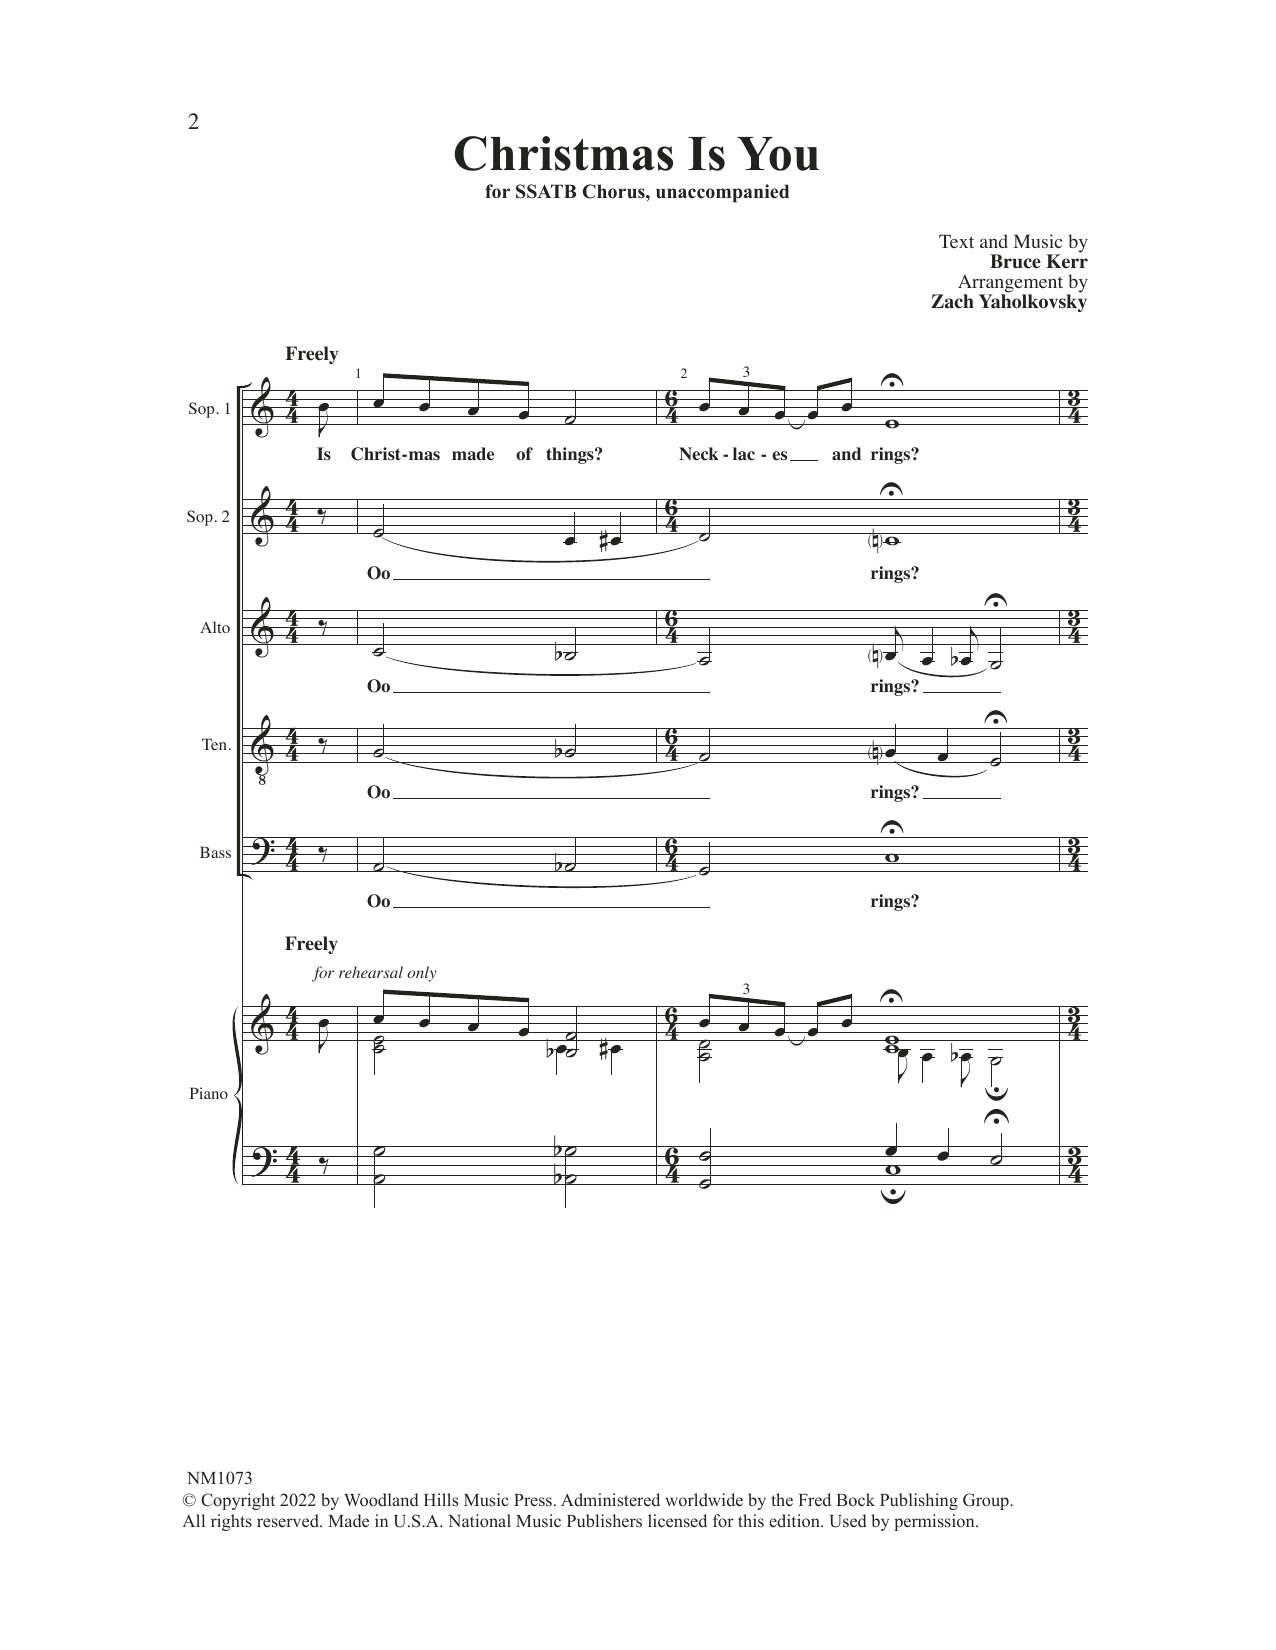 Download Zach Yaholkovsky Christmas Is You Sheet Music